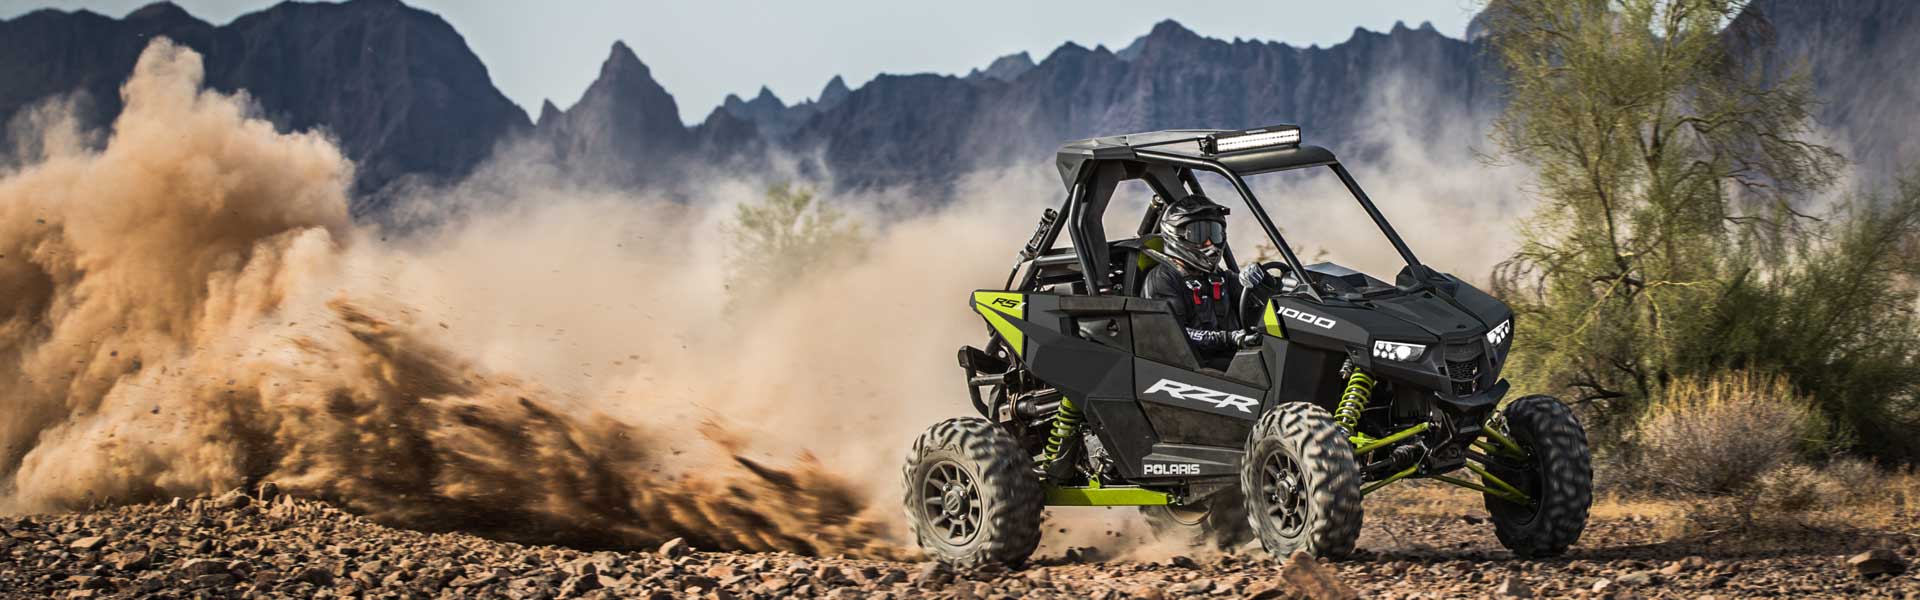 Rzr® RS1